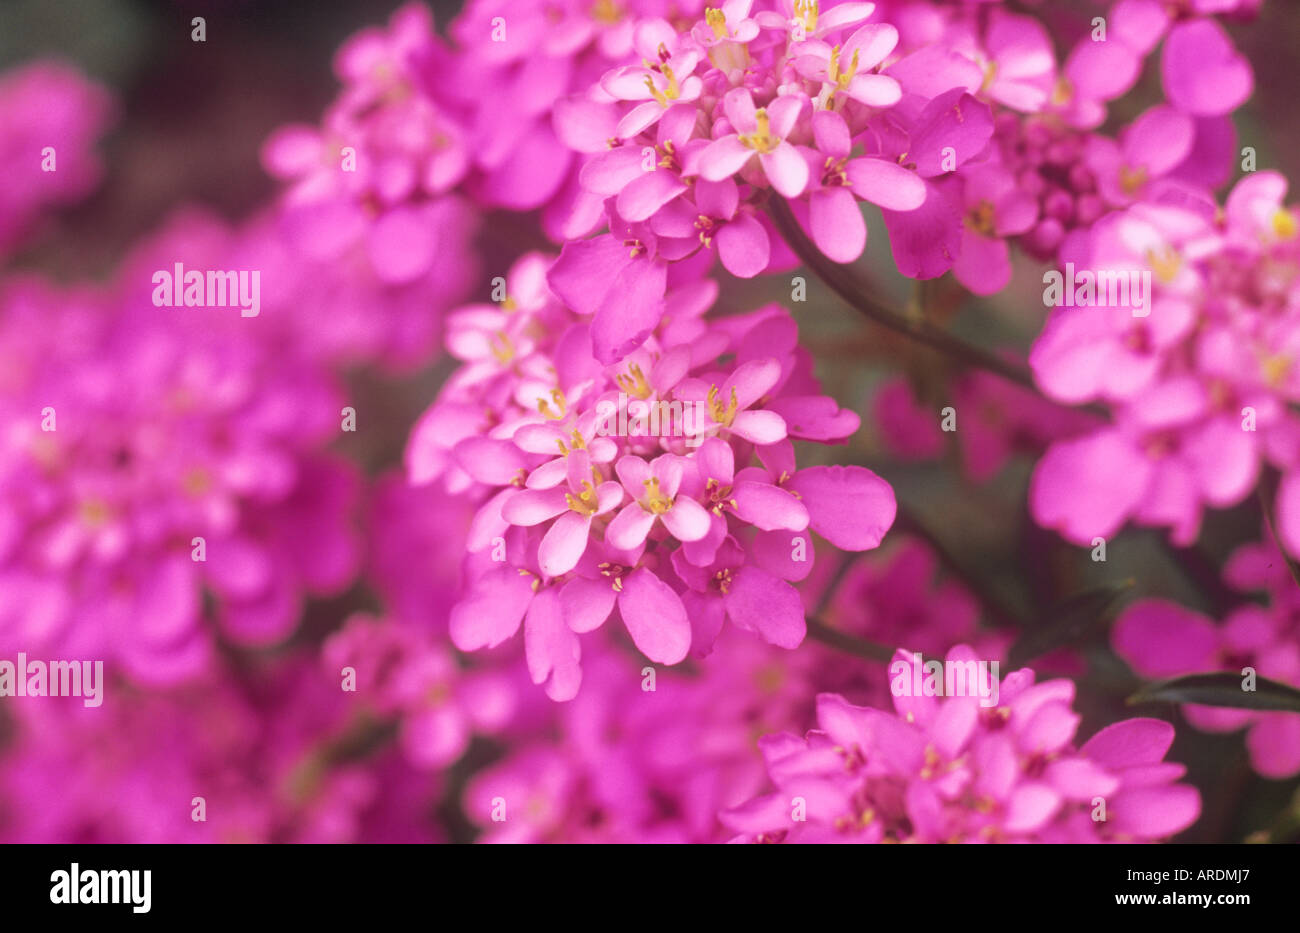 Close up of flowers of deep and pale pink Candytuft or Iberis umbellata Stock Photo